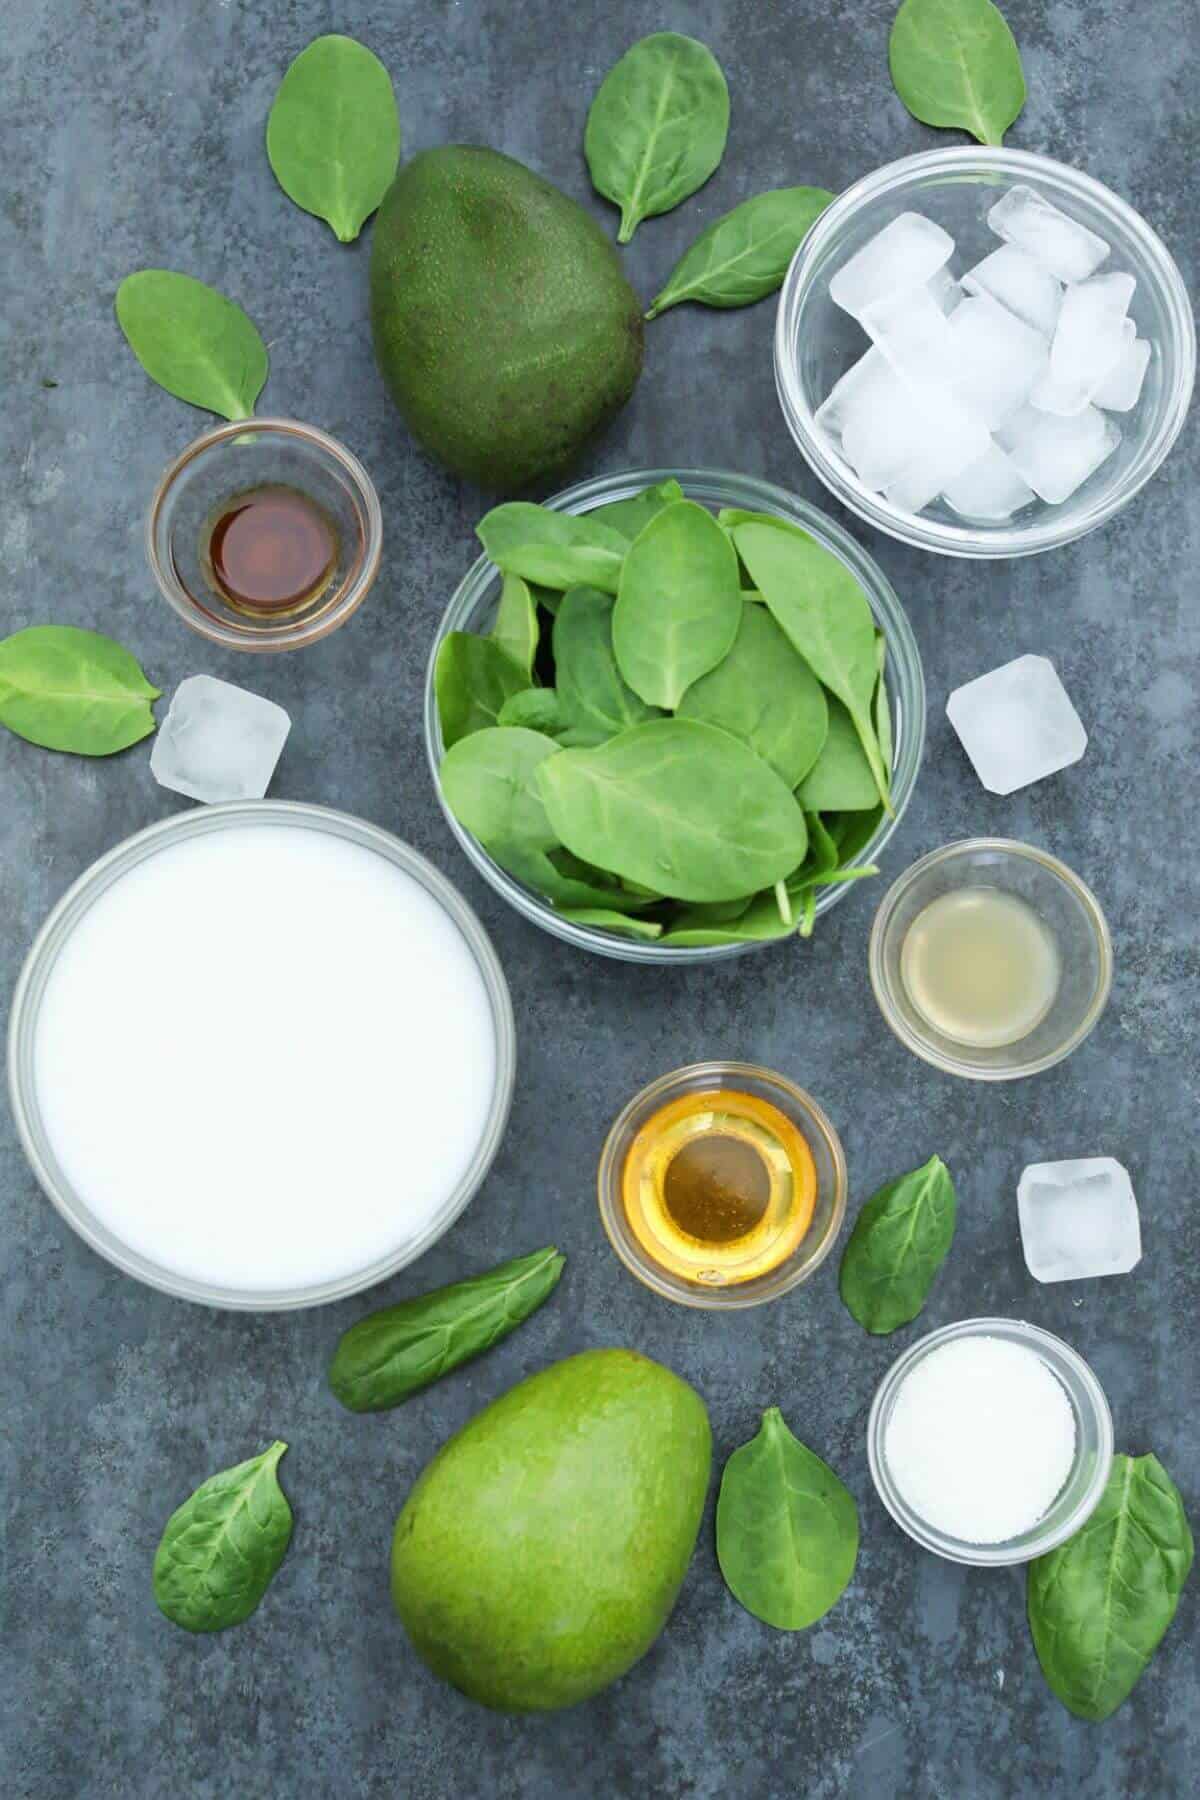 Ingredients for the green avocado spinach smoothie recipe.